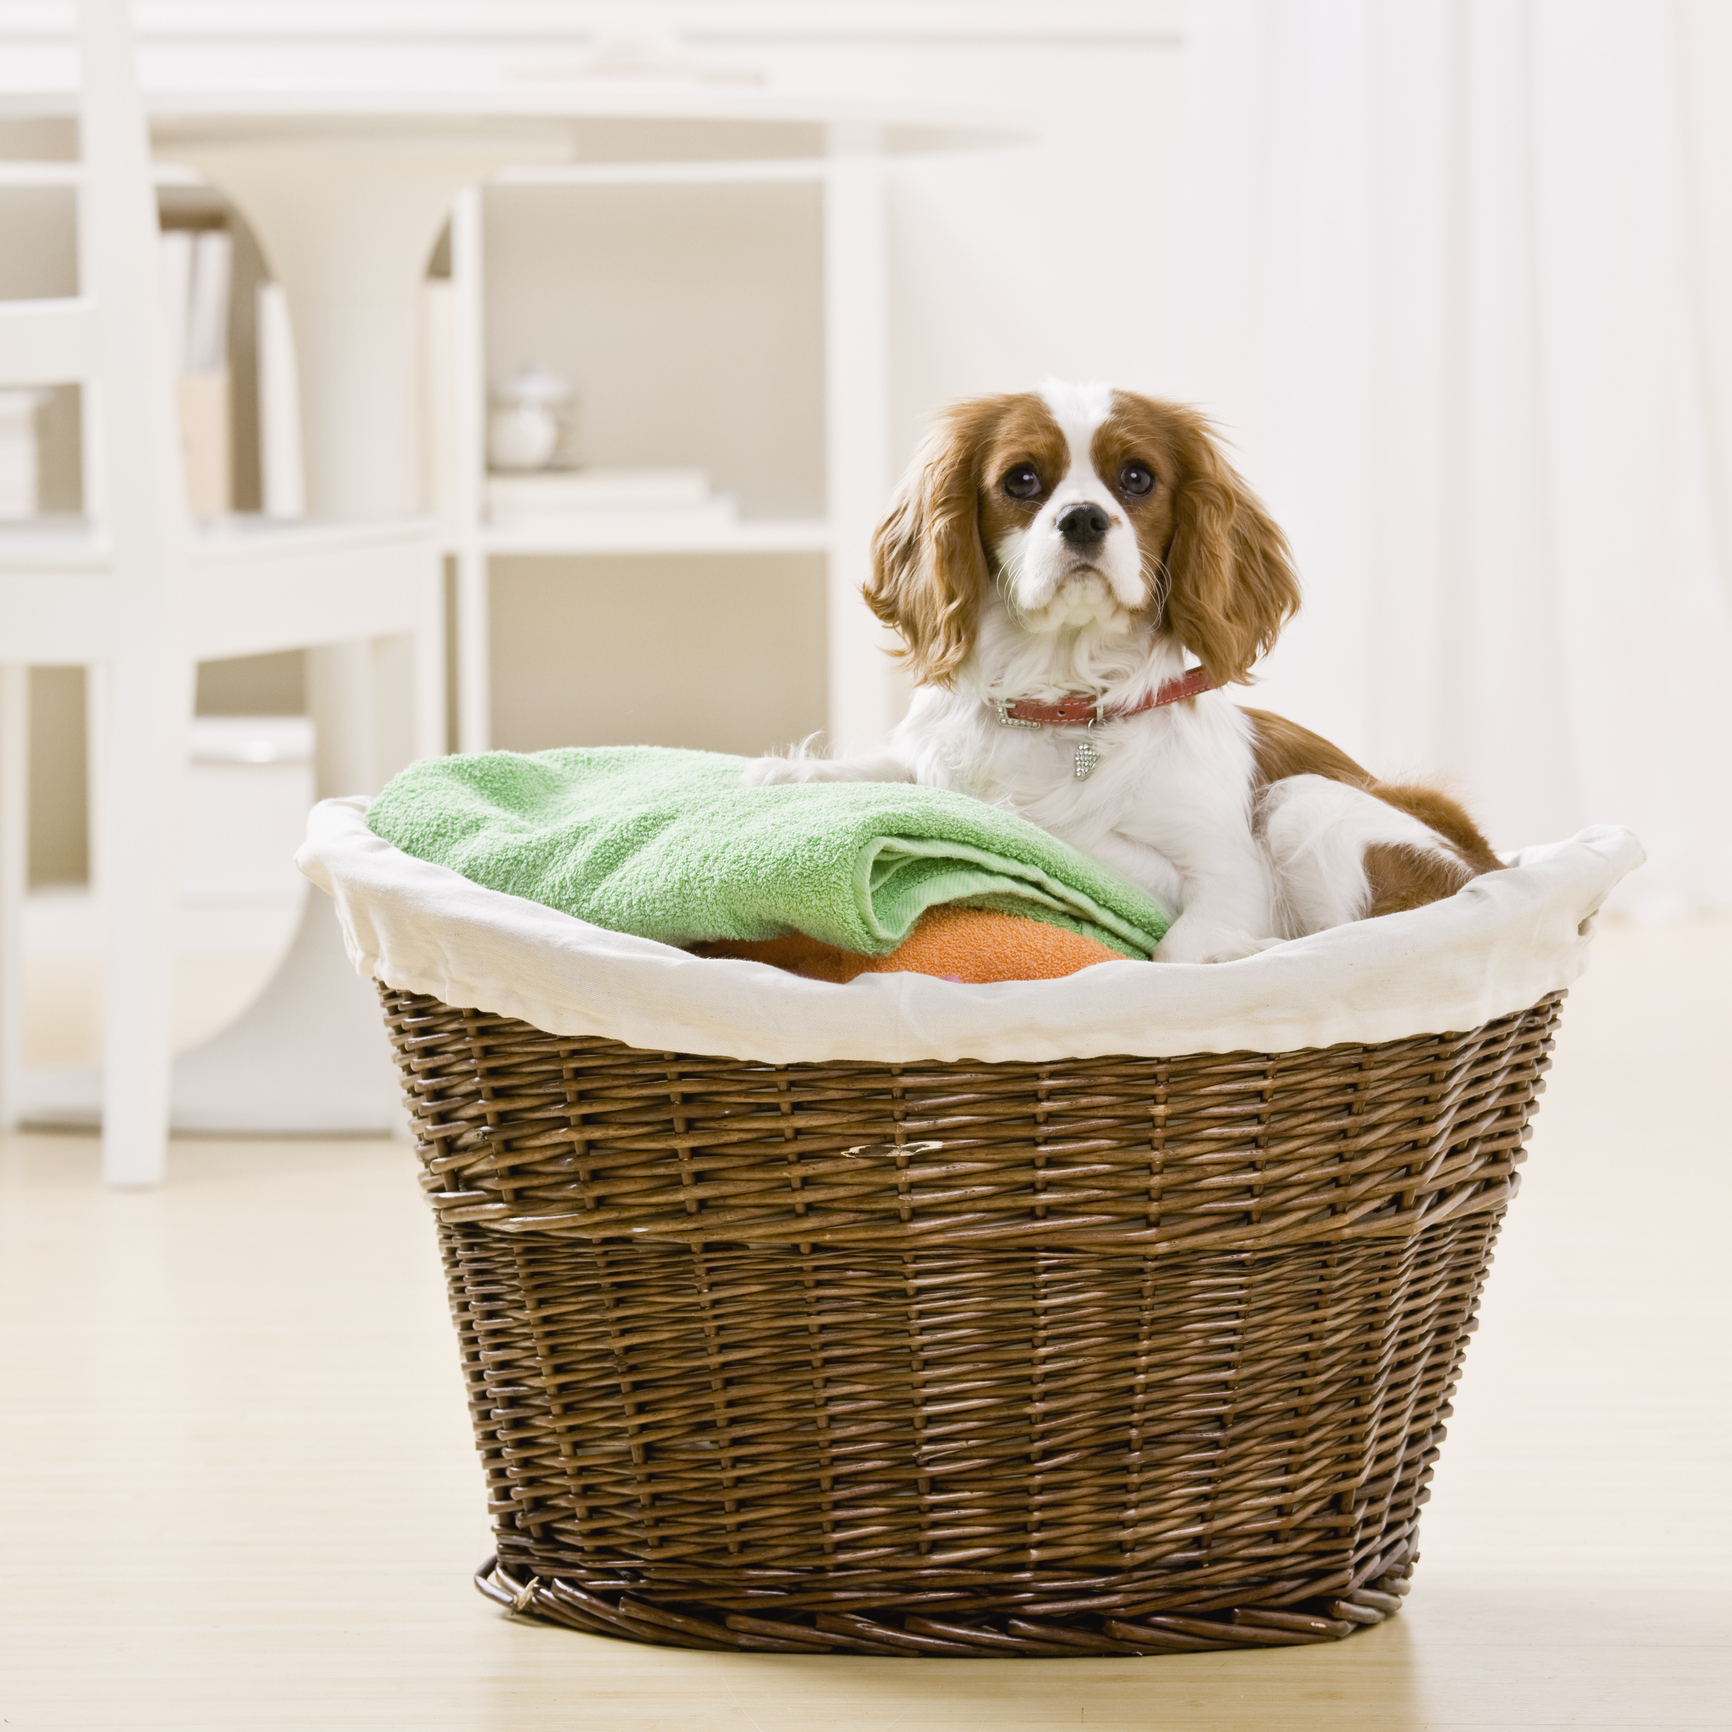 puppy sitting in laundry basket